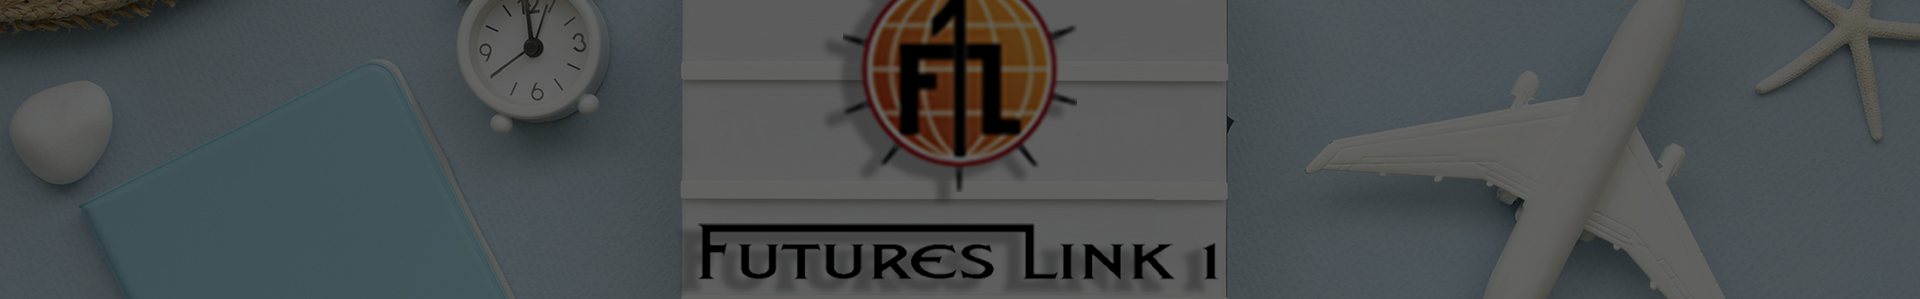 FUTURES LINK 1